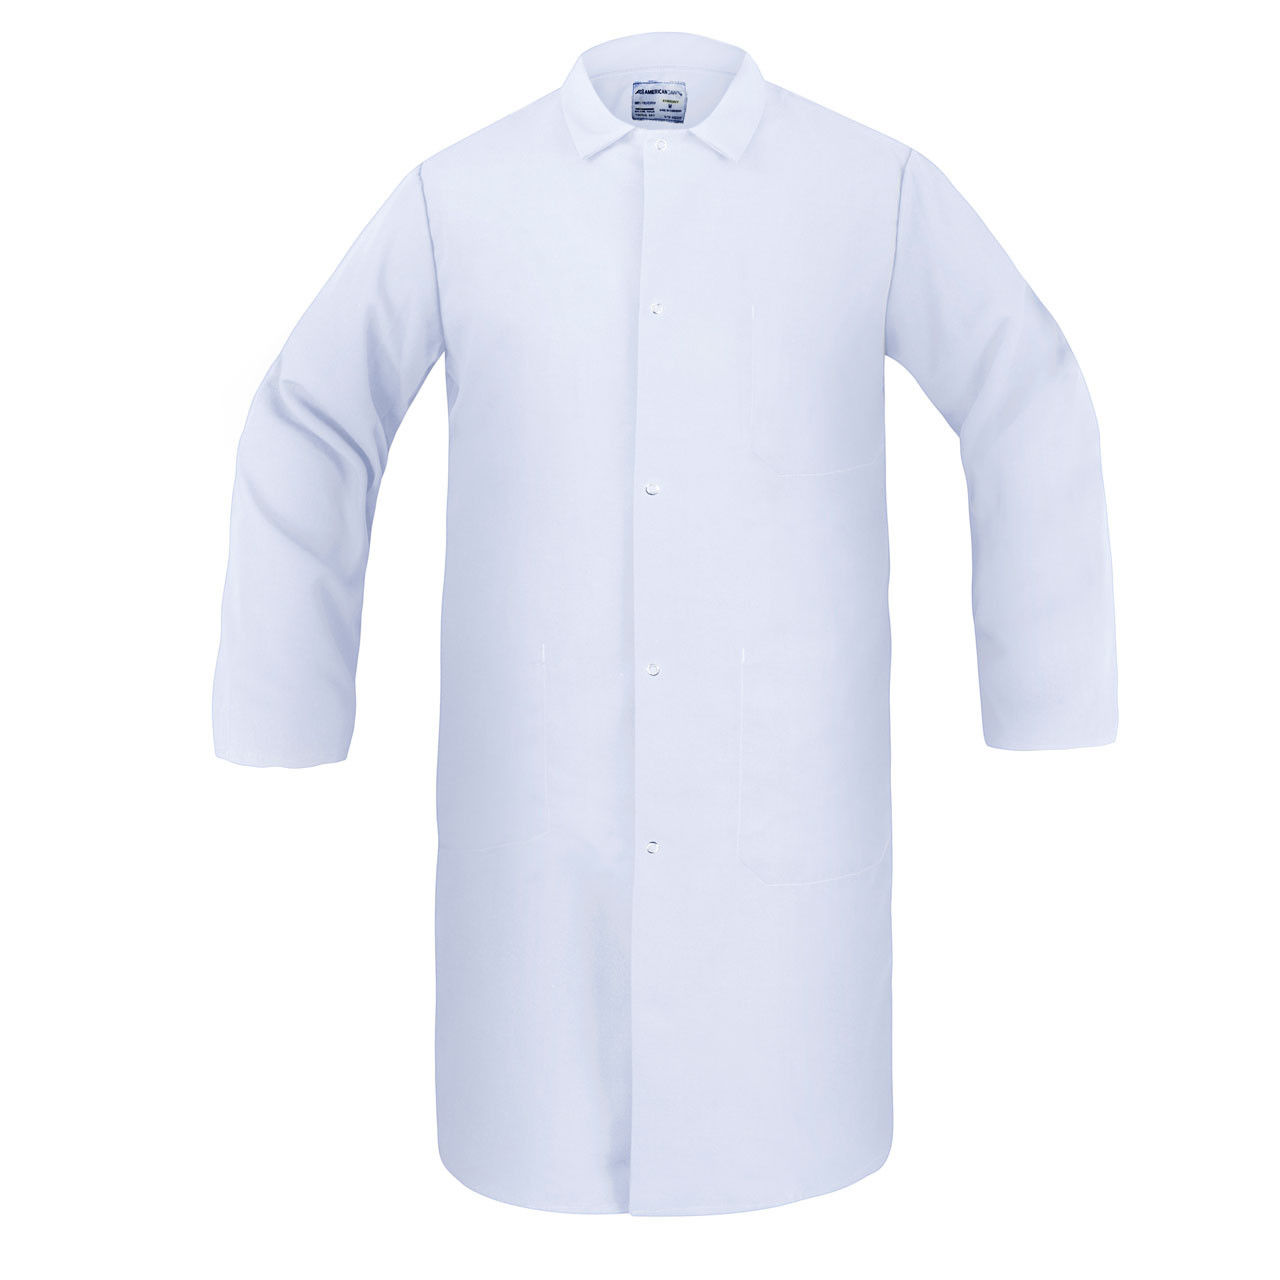 Is the color of the butcher frocks actually white?